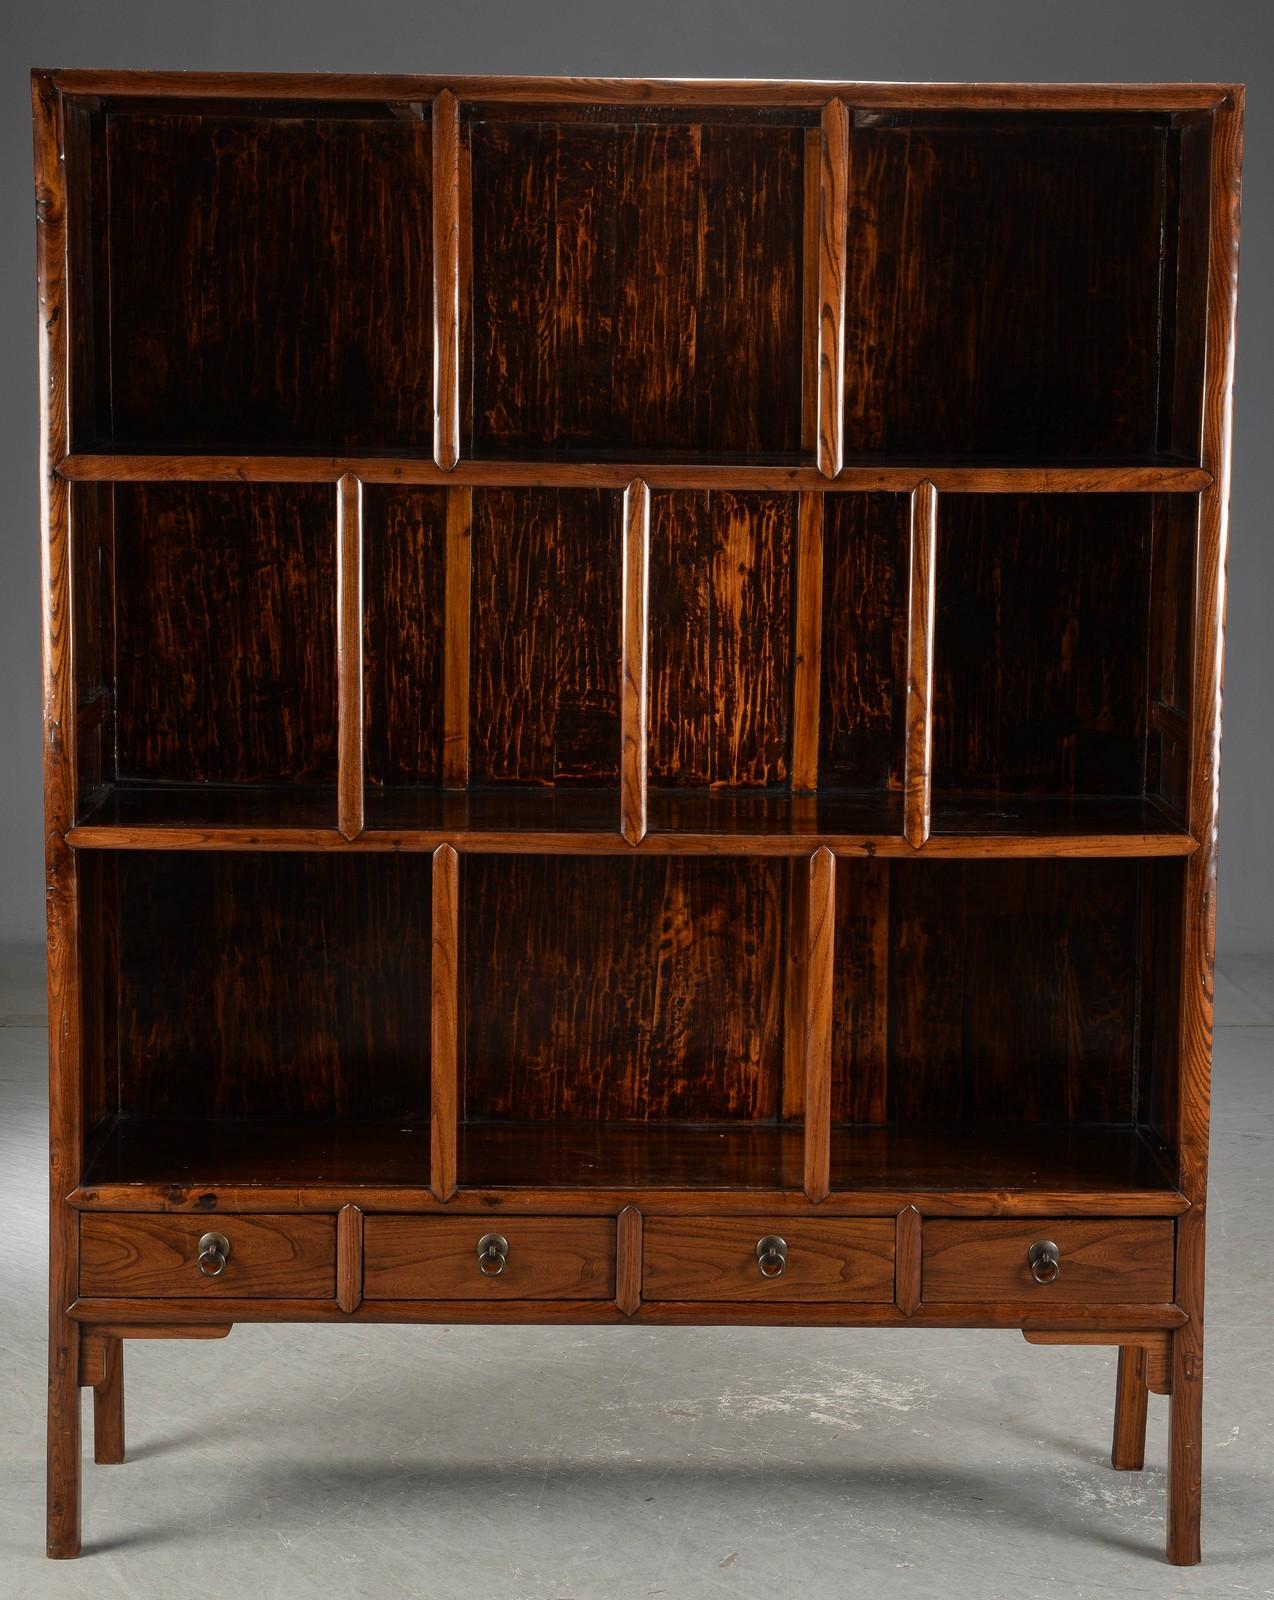 Chinese display cabinet or bookcase of stained hardwood, with compartments and drawers.